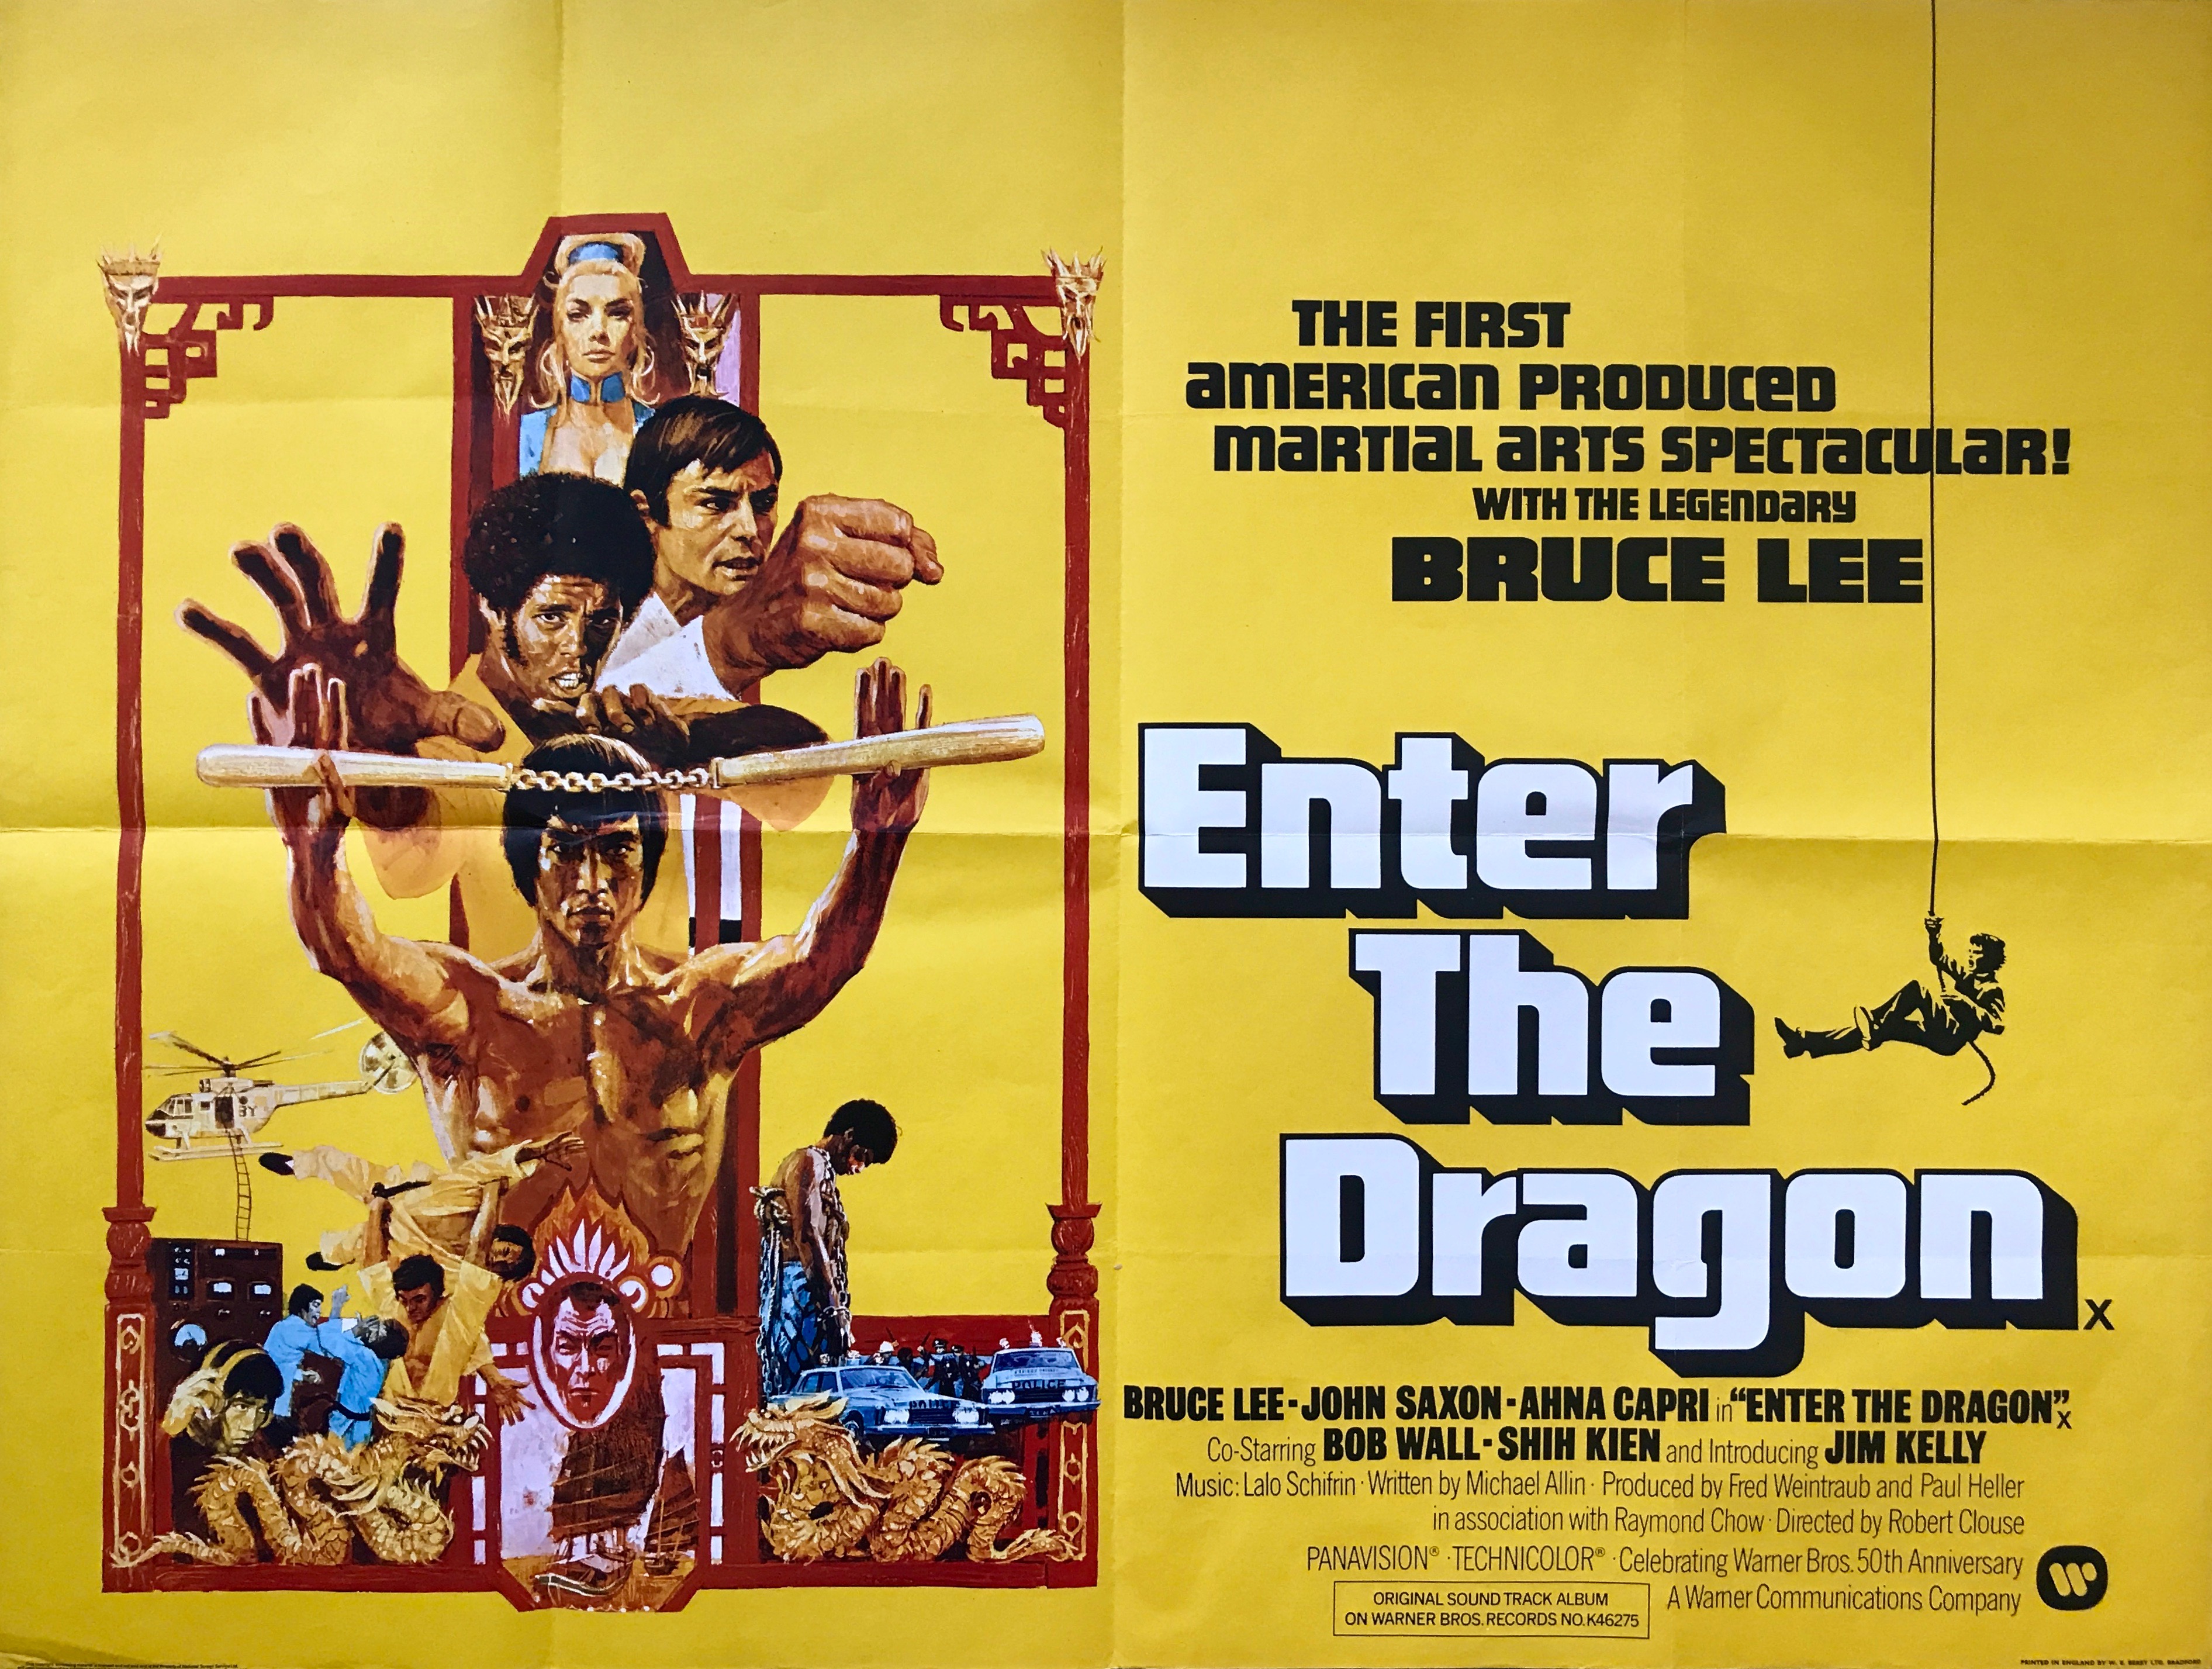 BRUCE LEE ENTER THE DRAGON Theatrical Poster A1 - A2